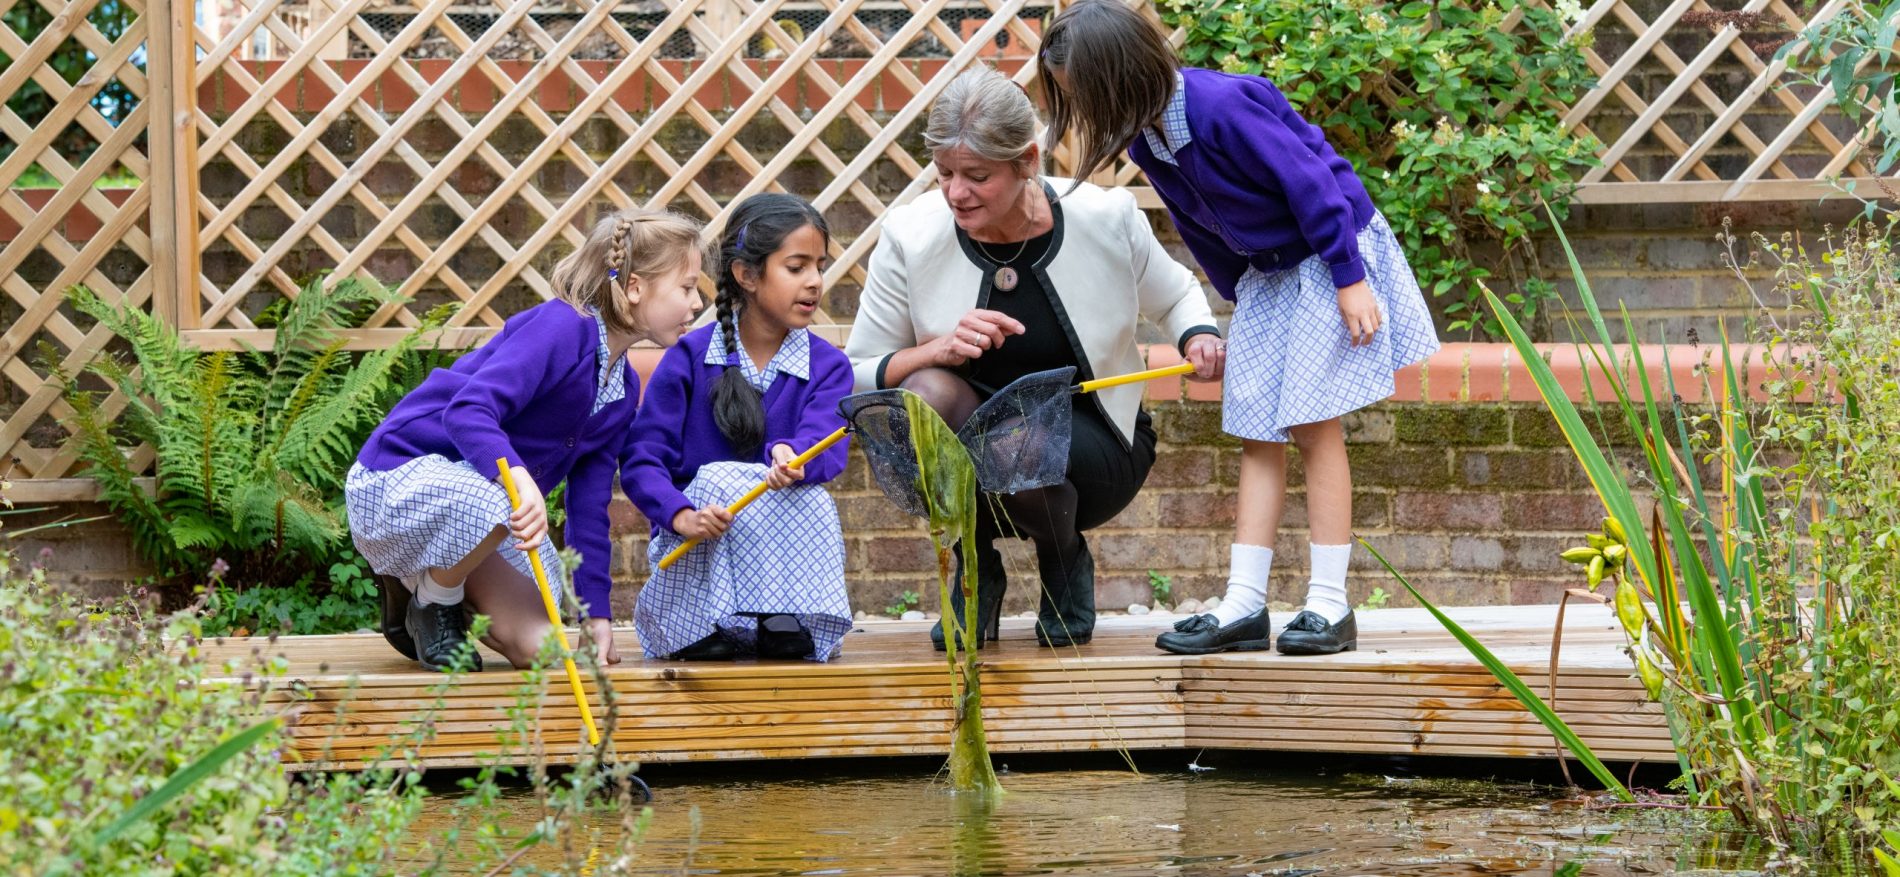 Head teacher looking at pond with school girls